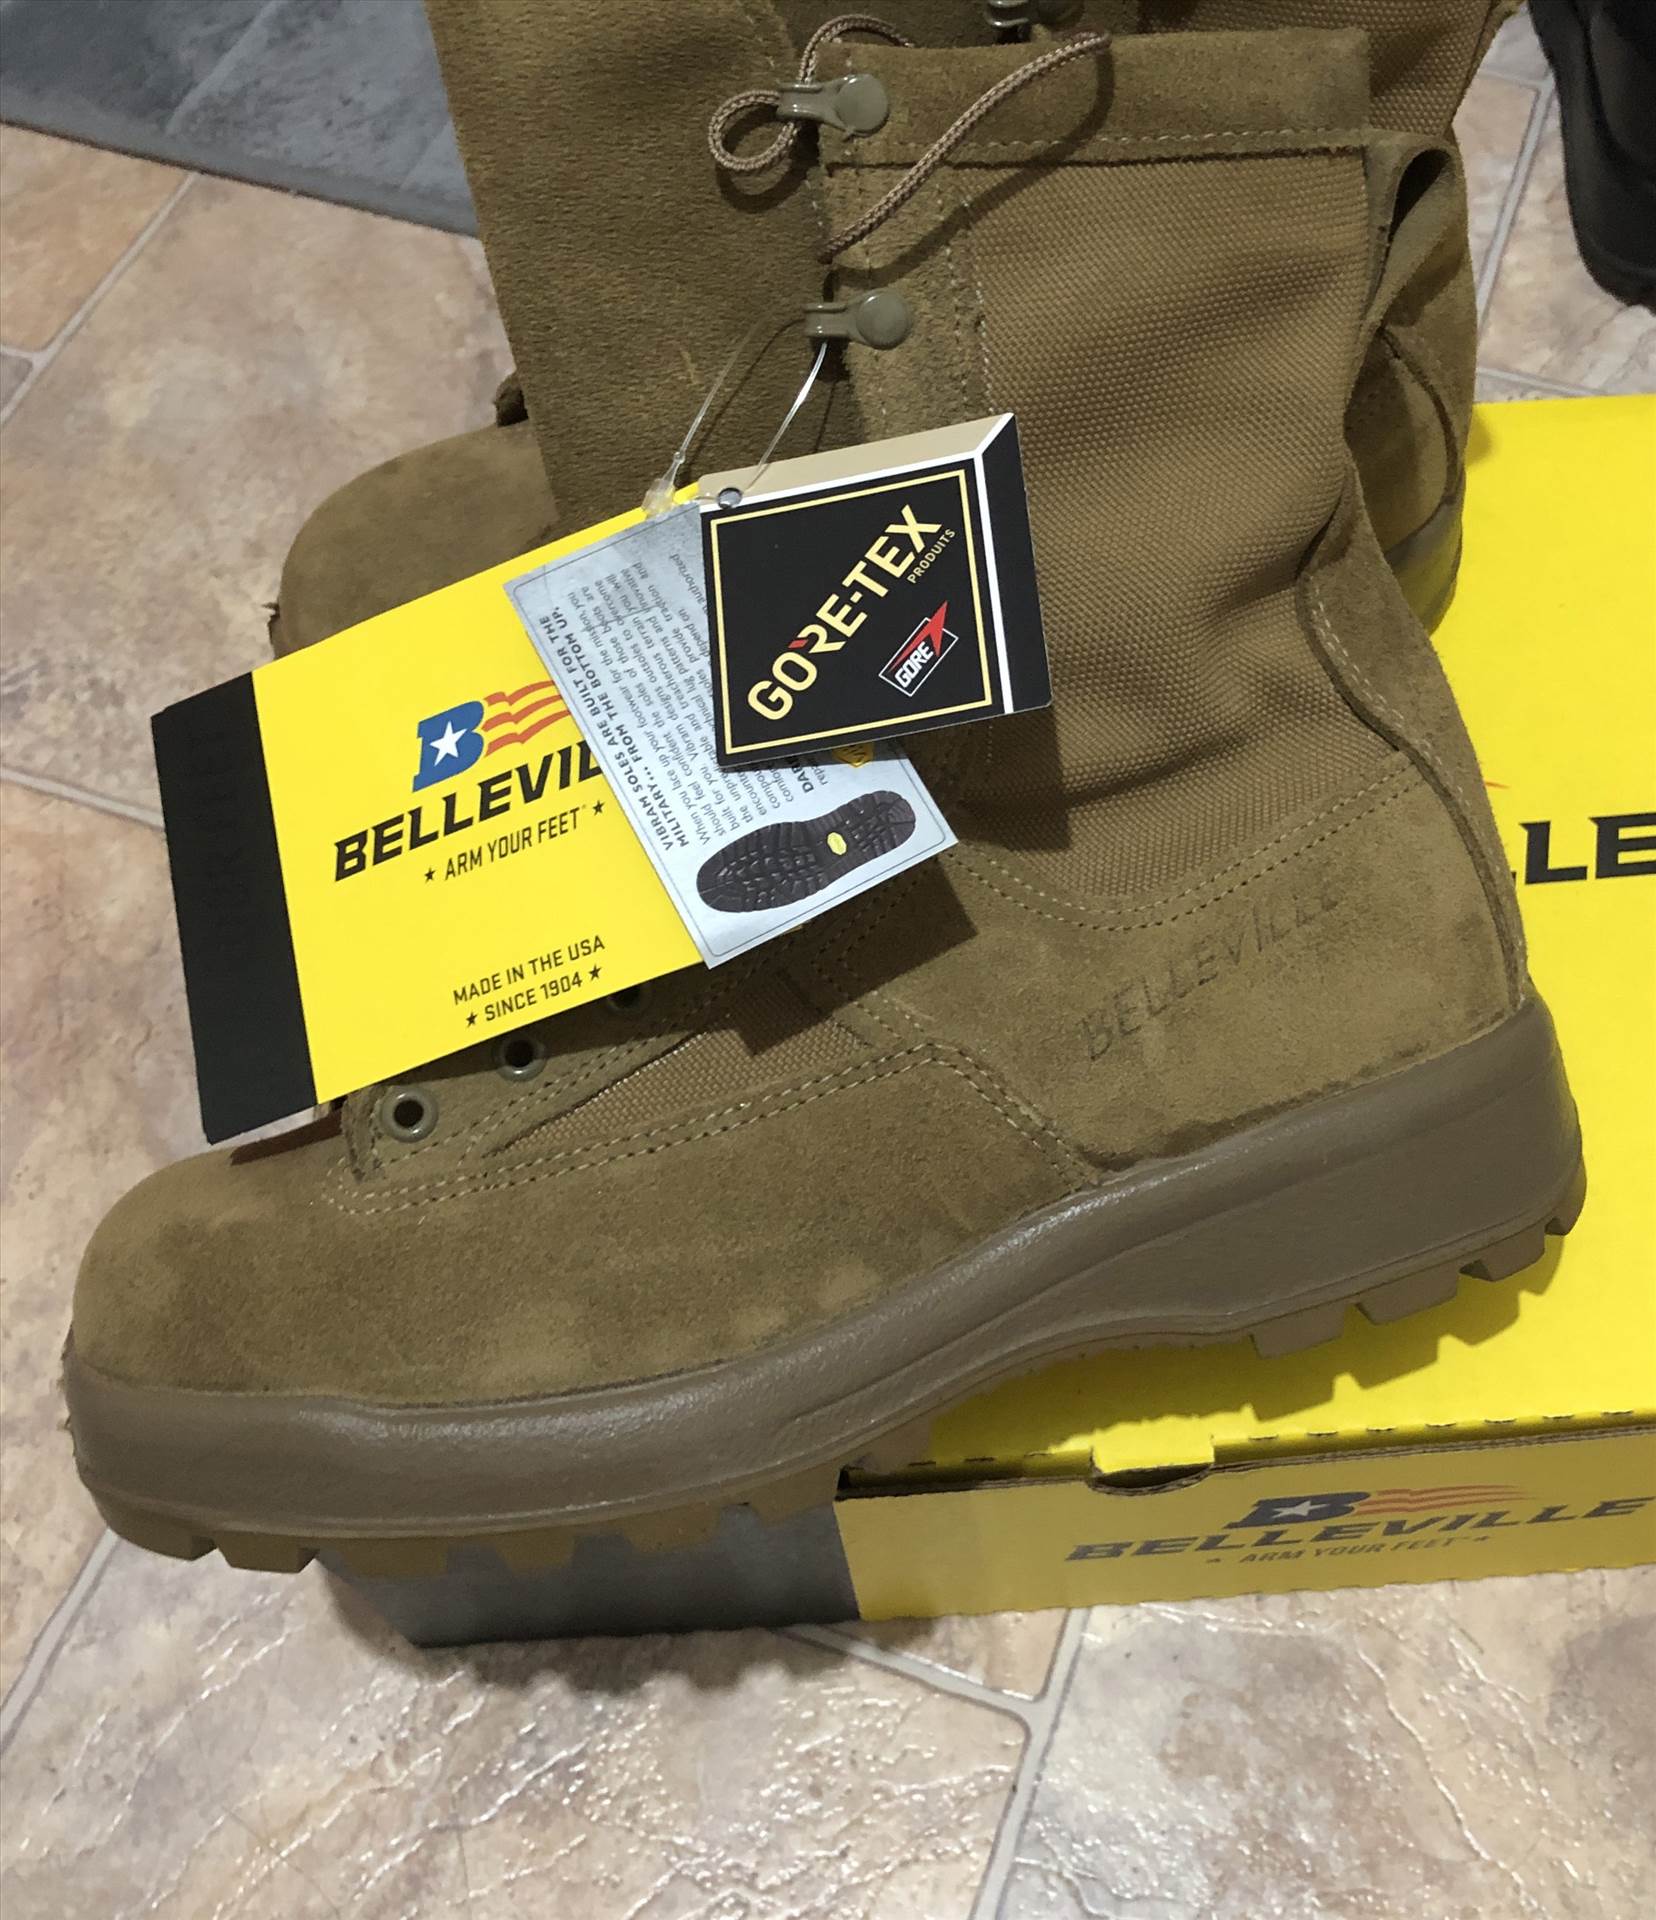 belleville c795 boots belleville c795 waterproof insulated boots by johntorcasio